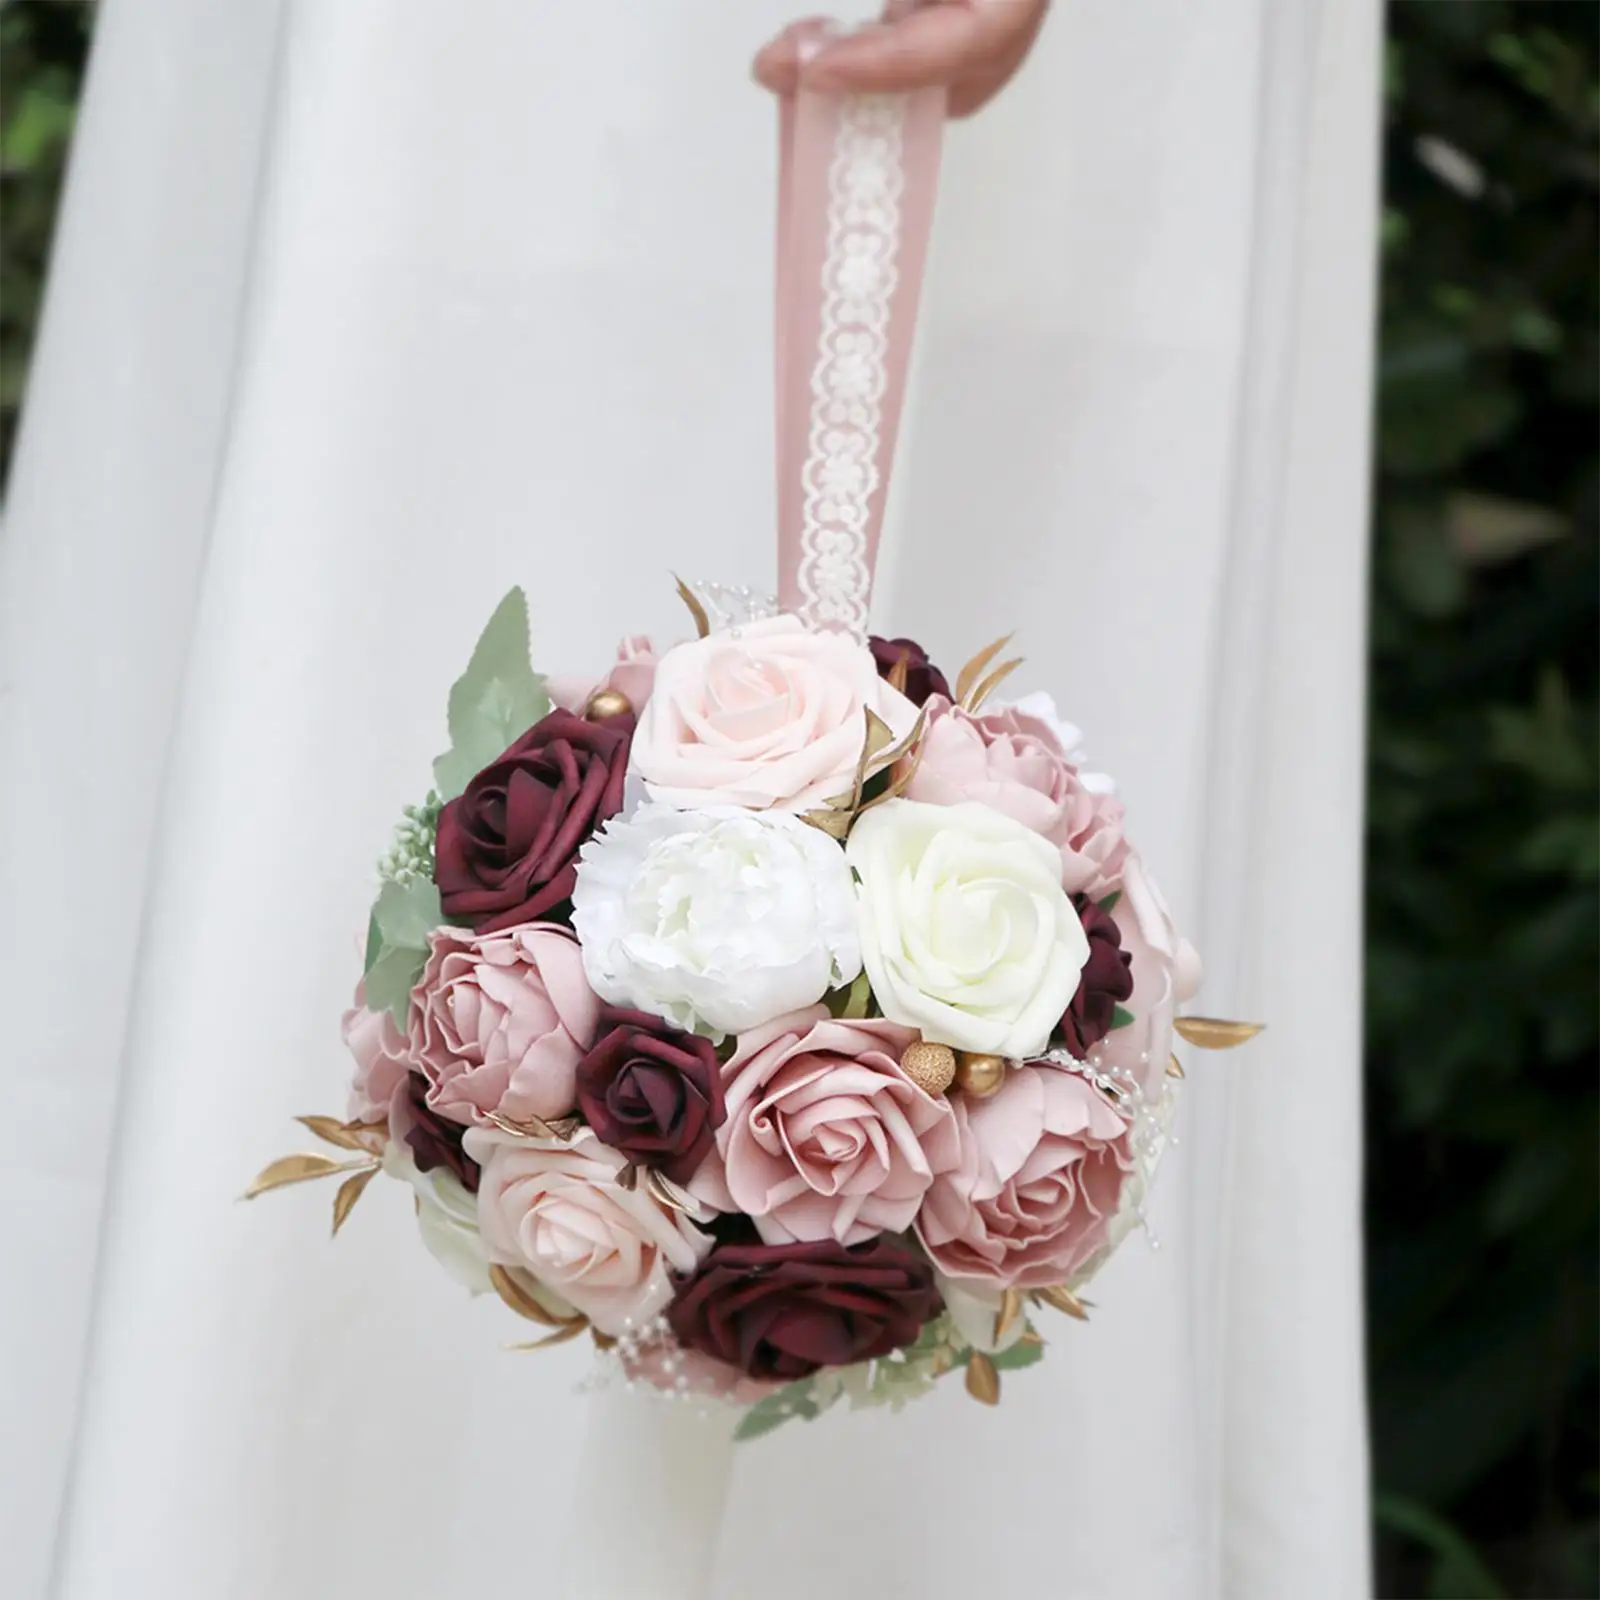 Bridal Bouquet Silk Flower Bridesmaid Holding Flowers Rustic for Church Ceremony